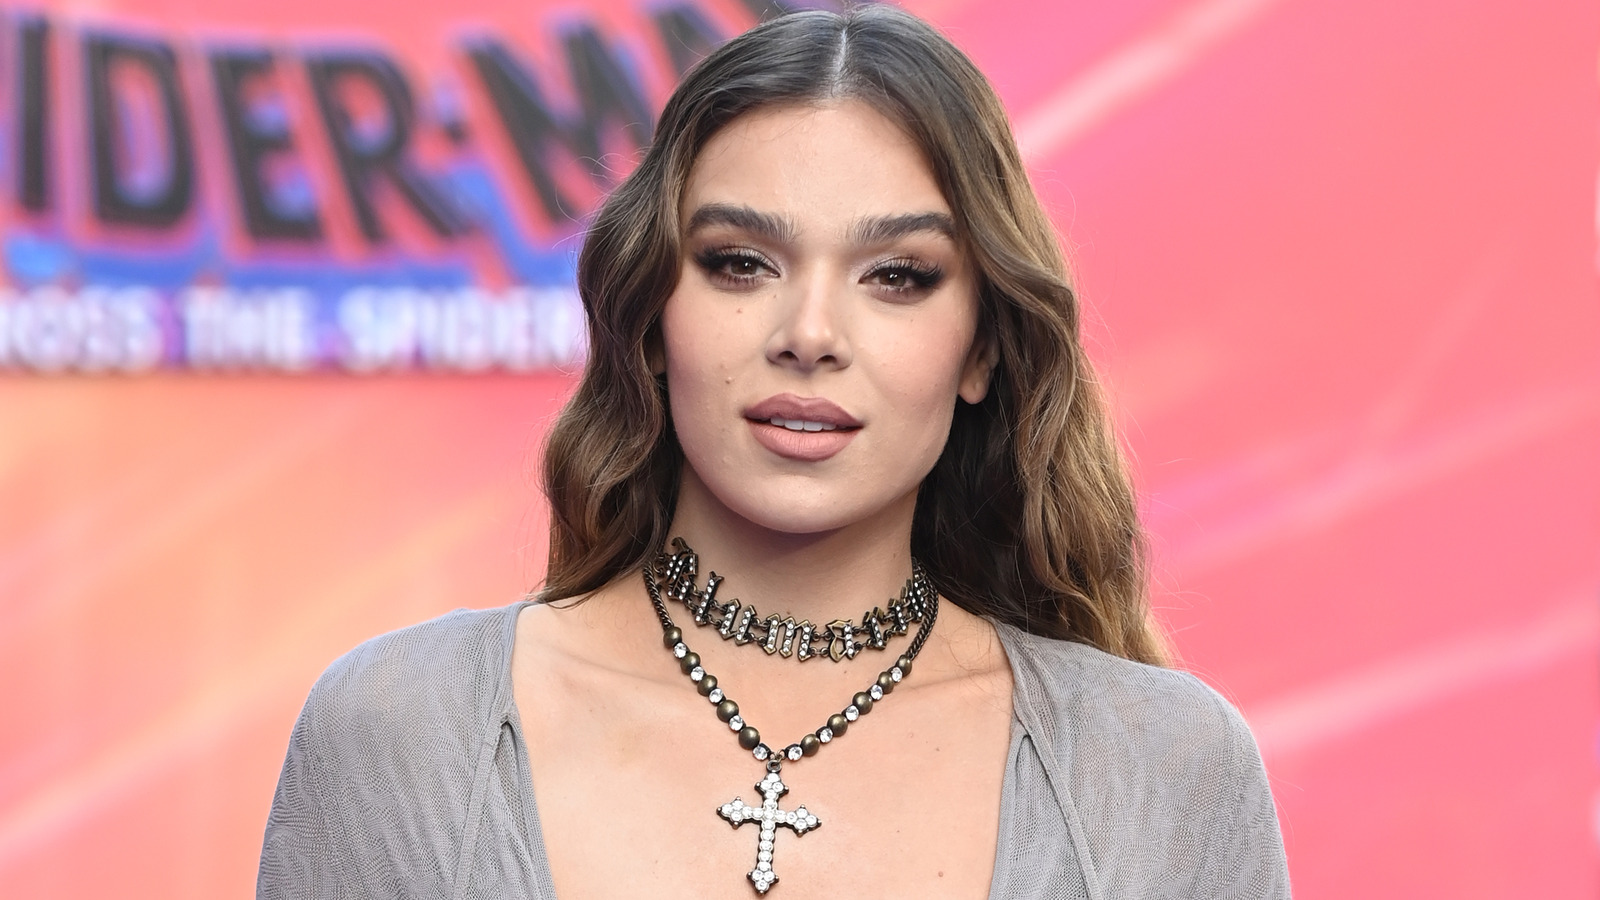 Hailee Steinfeld Opened Up About Her Relationship With Social Media